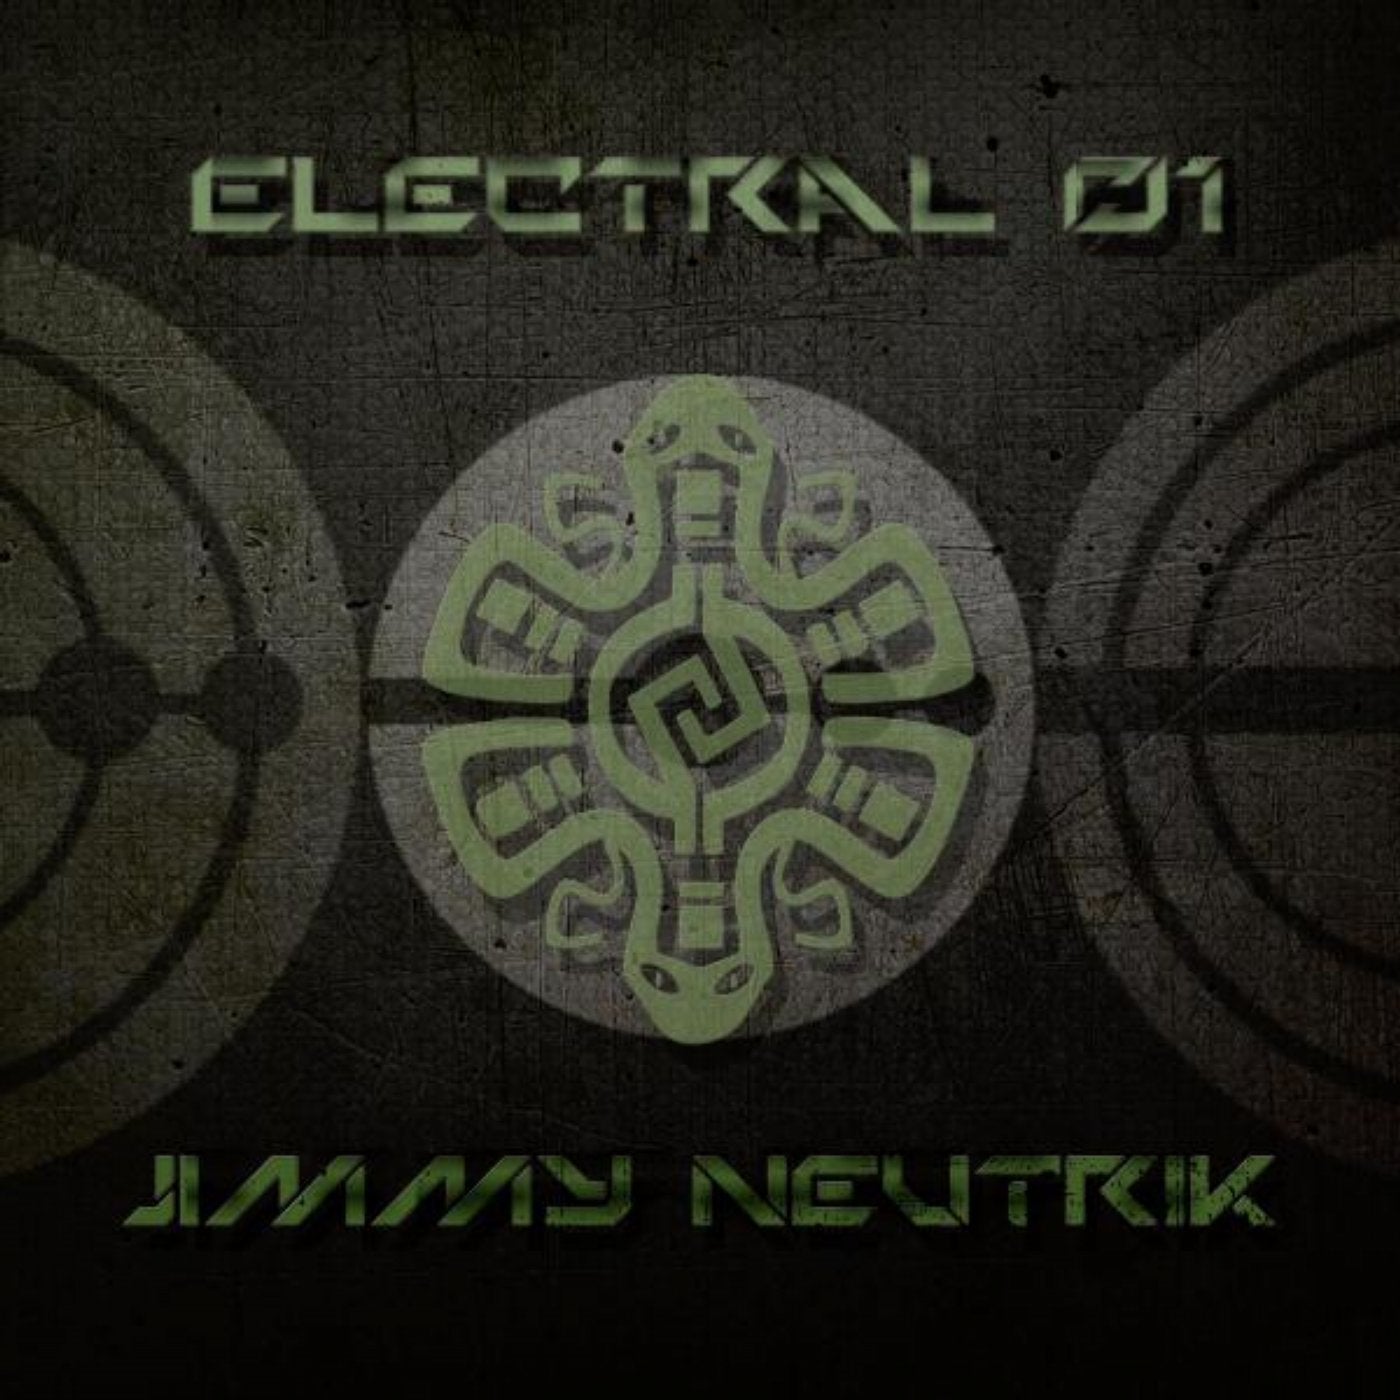 Electral 01